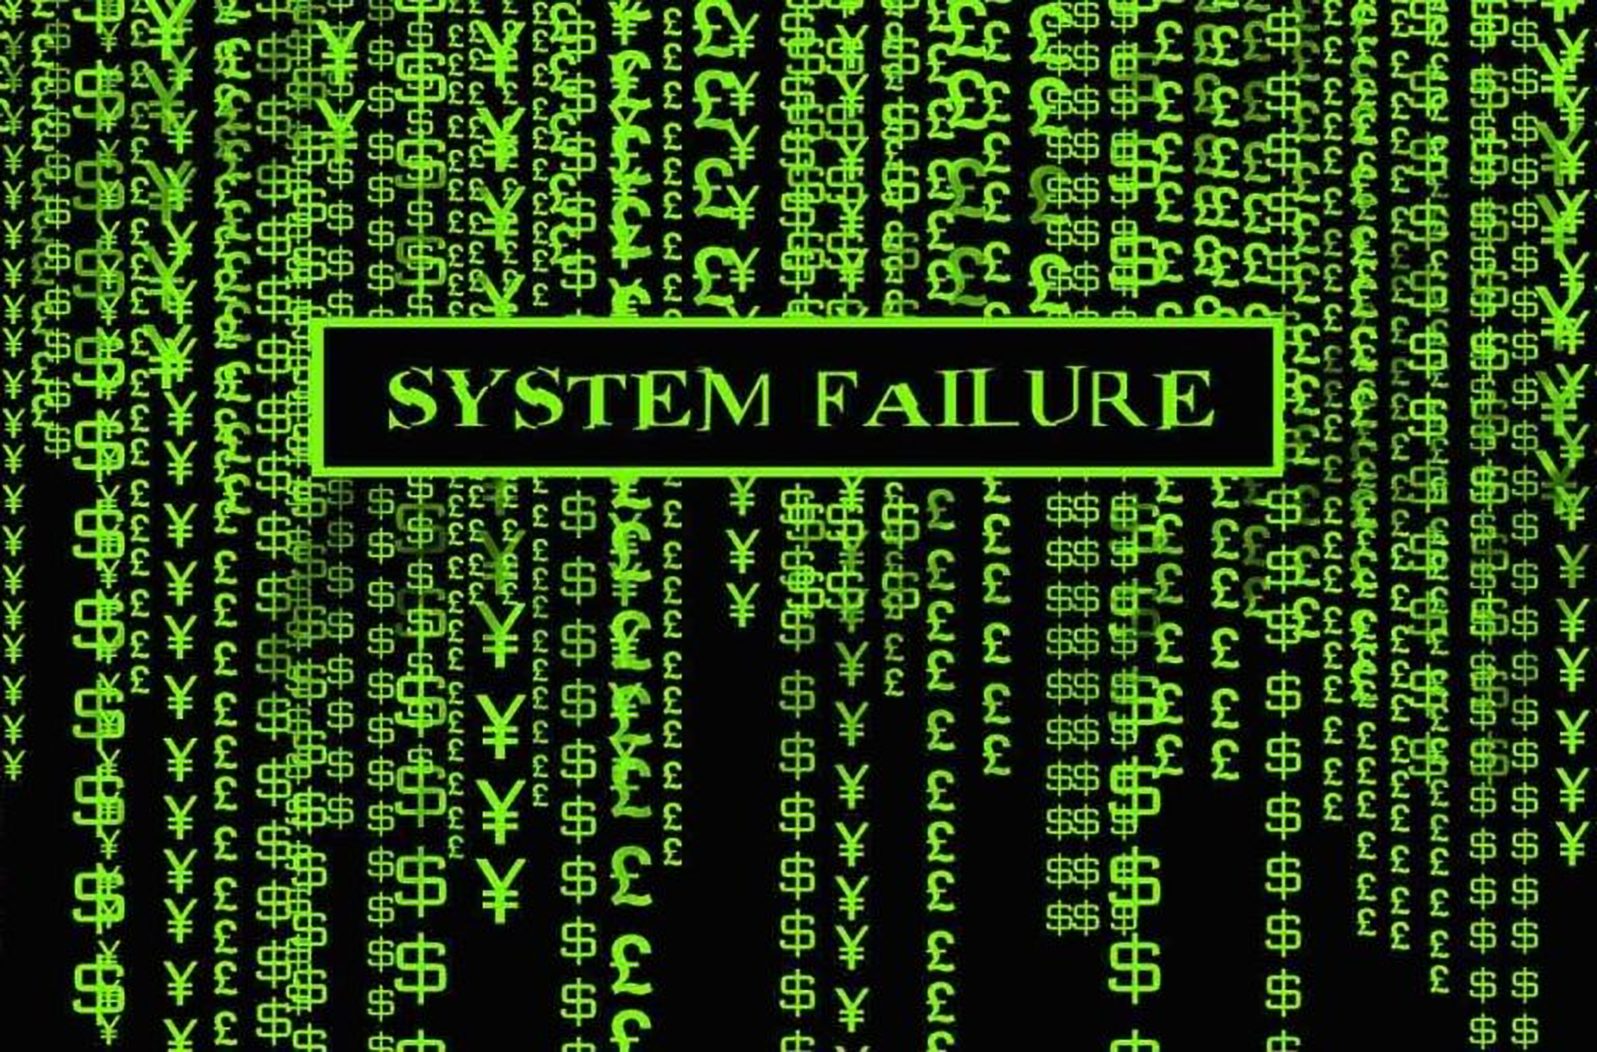 These systems are failing. Матрица системы. System failure. System failure обои.